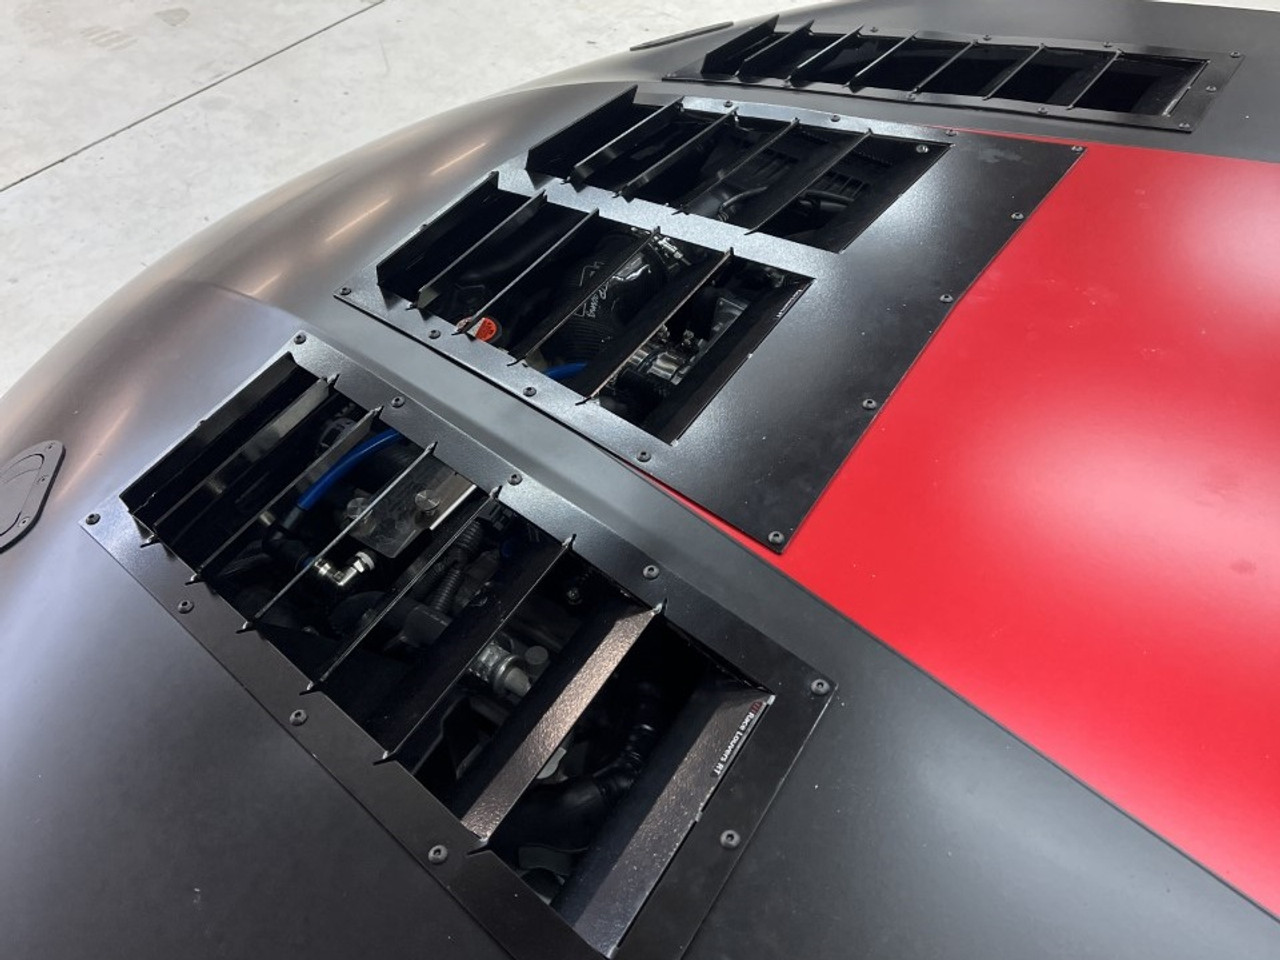 Race Louver RT trim center car hood extractor is designed for street, high performance driving and track duty.